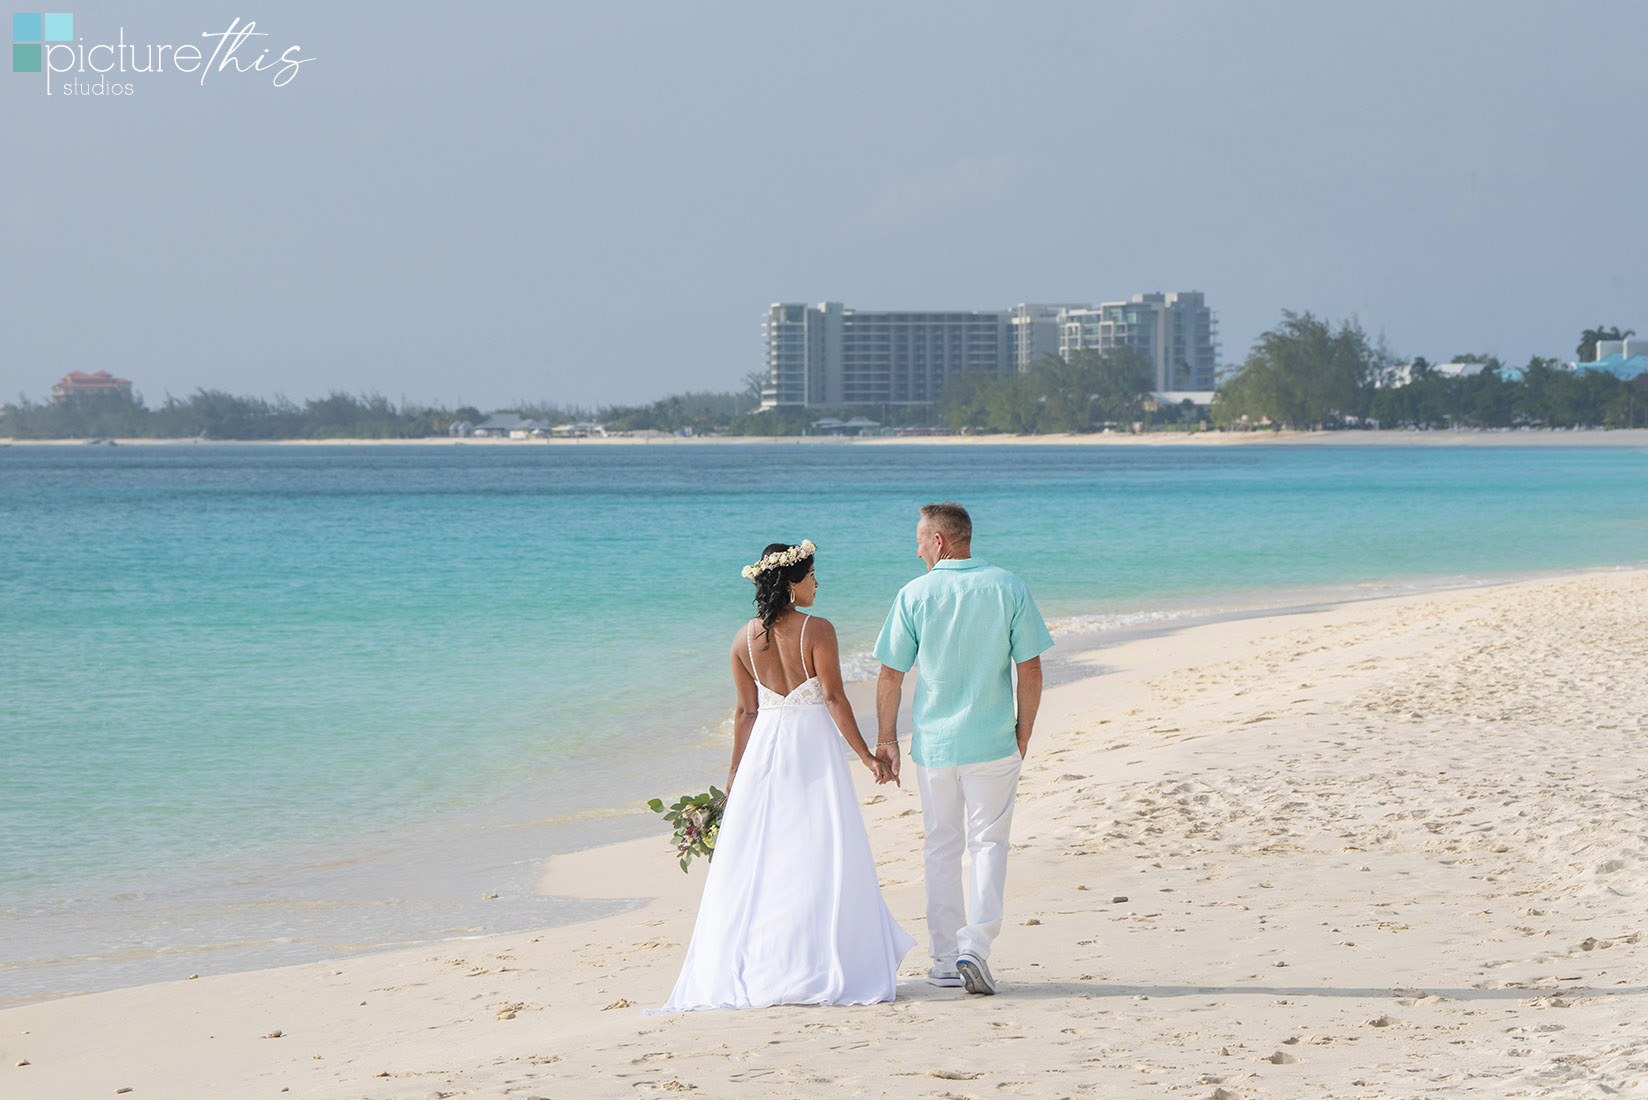 Picture This Studios and Heather Holt Photography captured this beautiful Cayman Islands Wedding held at the Meridian.